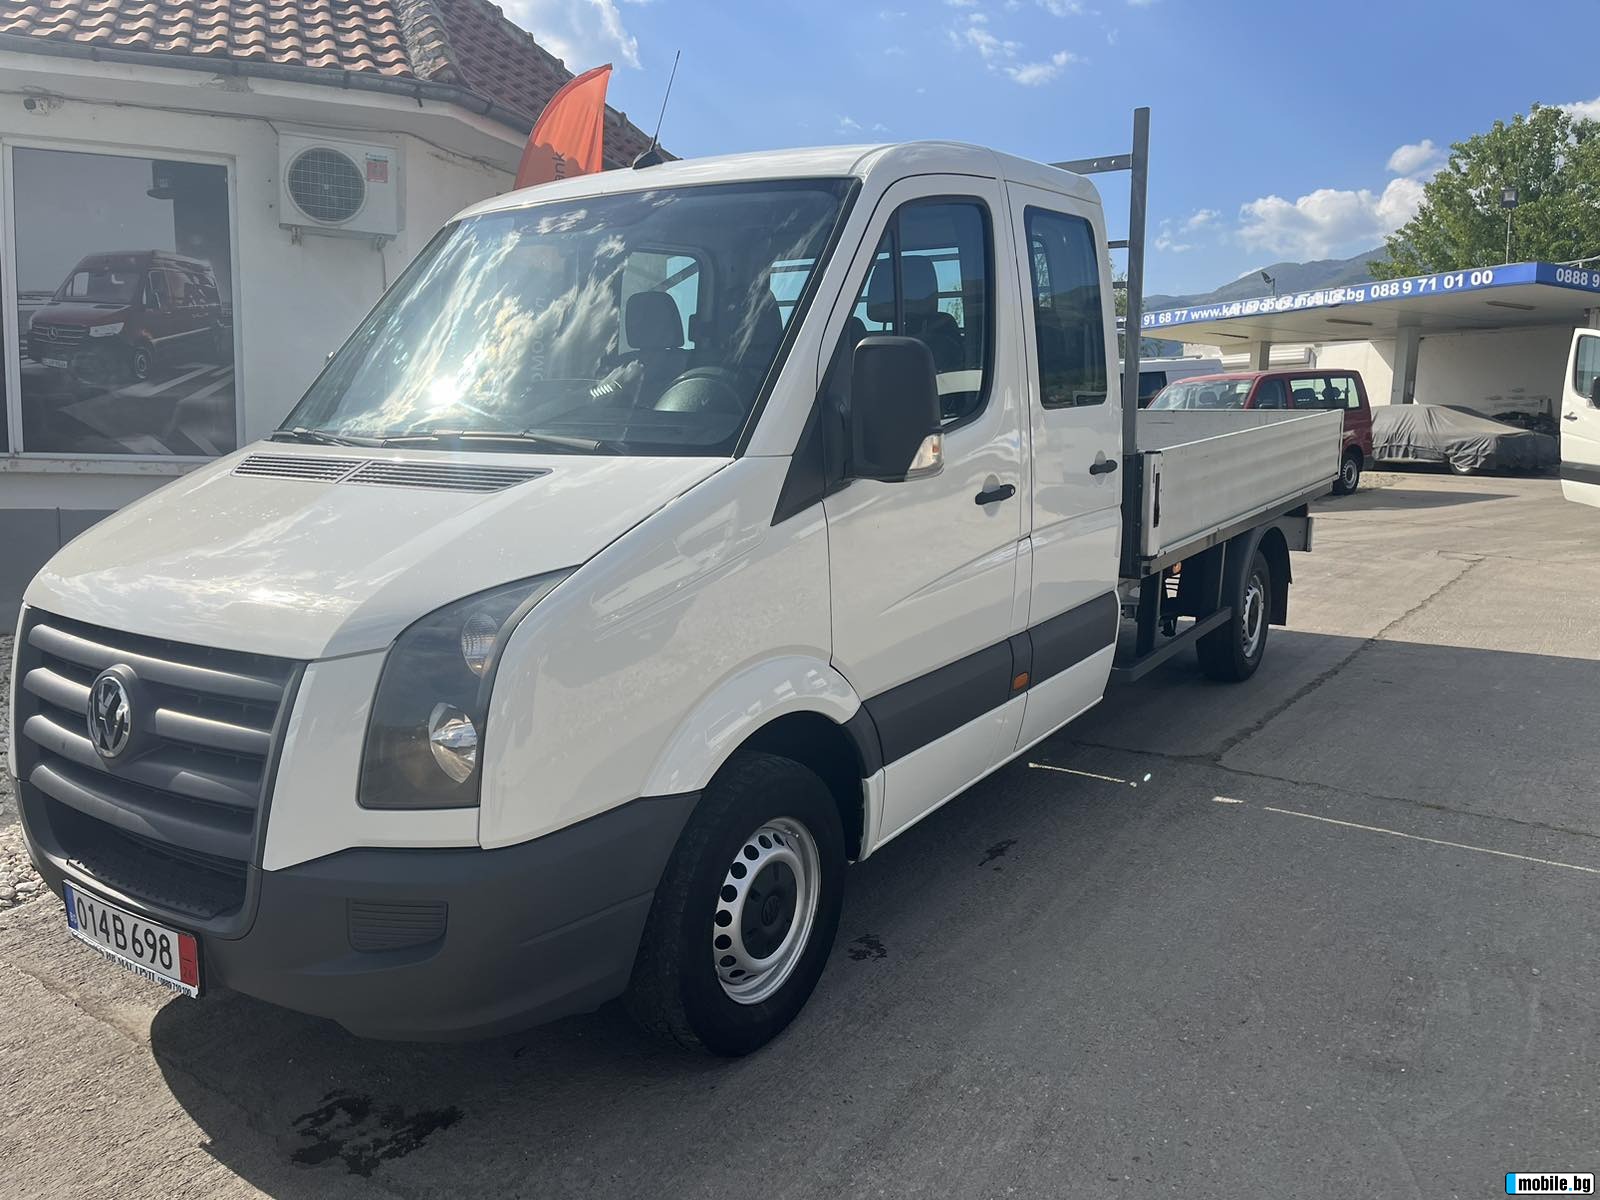 VW Crafter 7,3.45 EURO5 | Mobile.bg   3